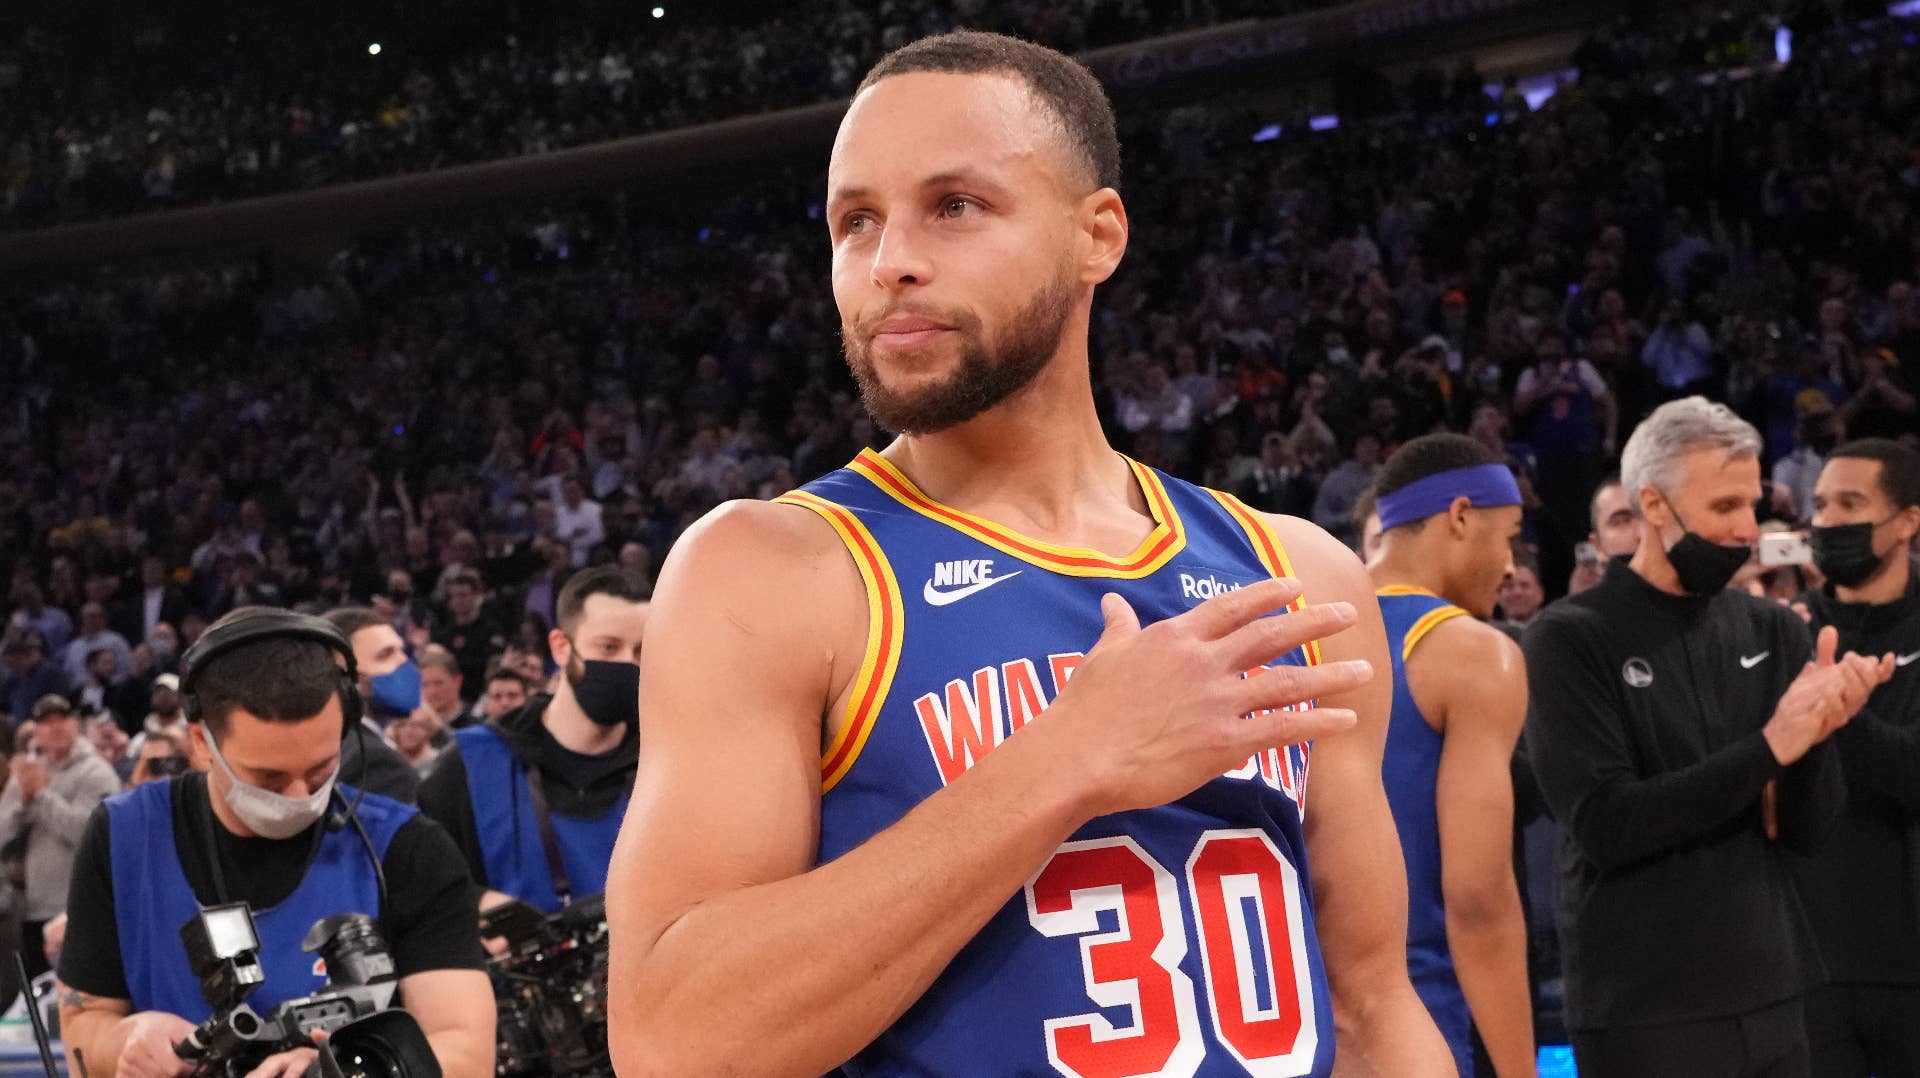 Stephen Curry celebrates setting the NBA's most three pointers made record.